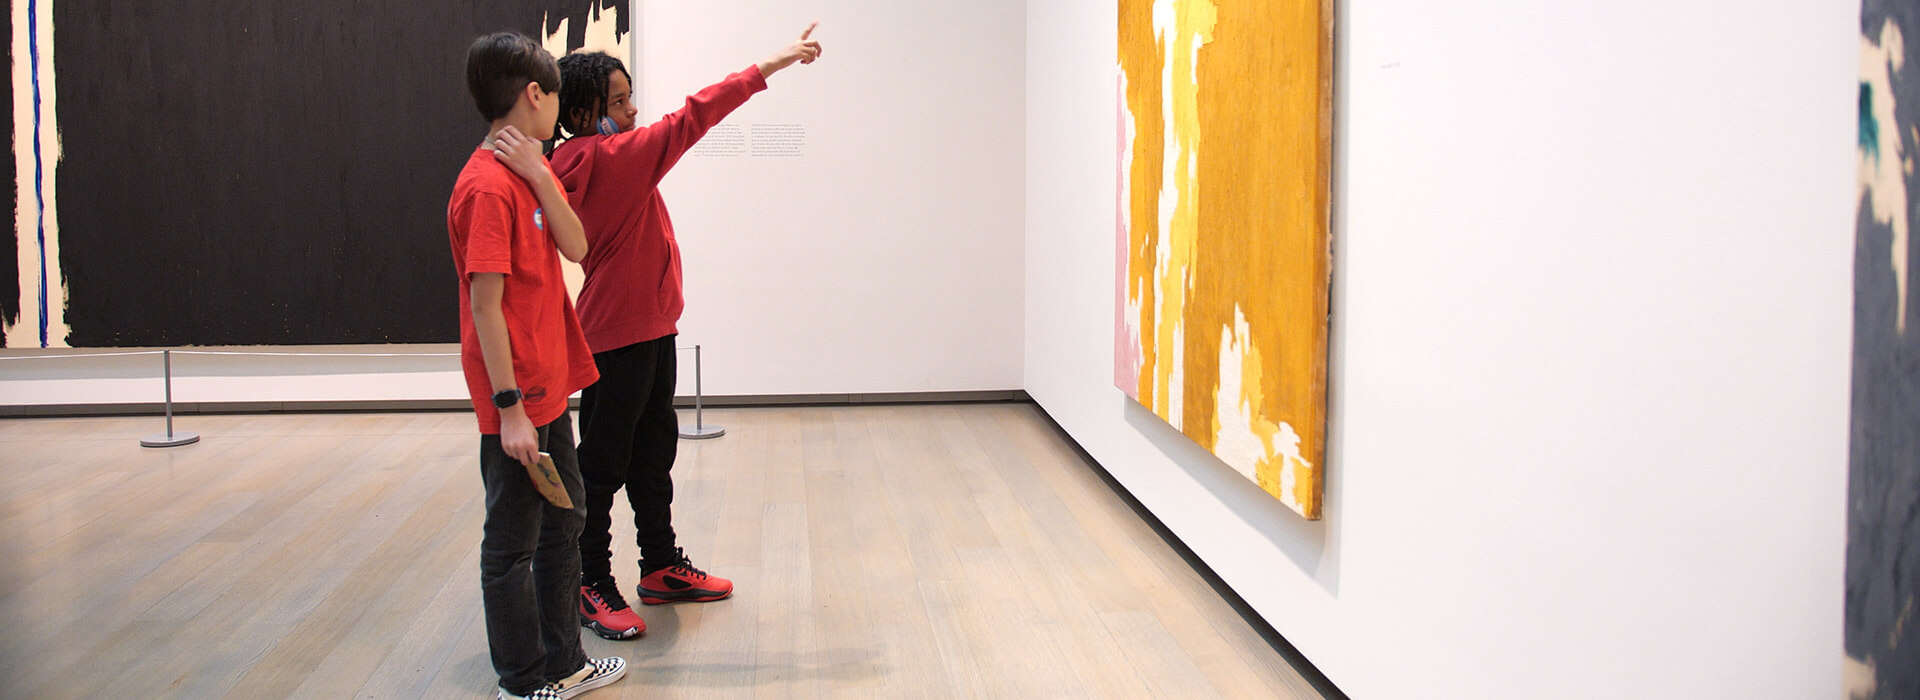 Two students look at a painting on a wall while one points at it